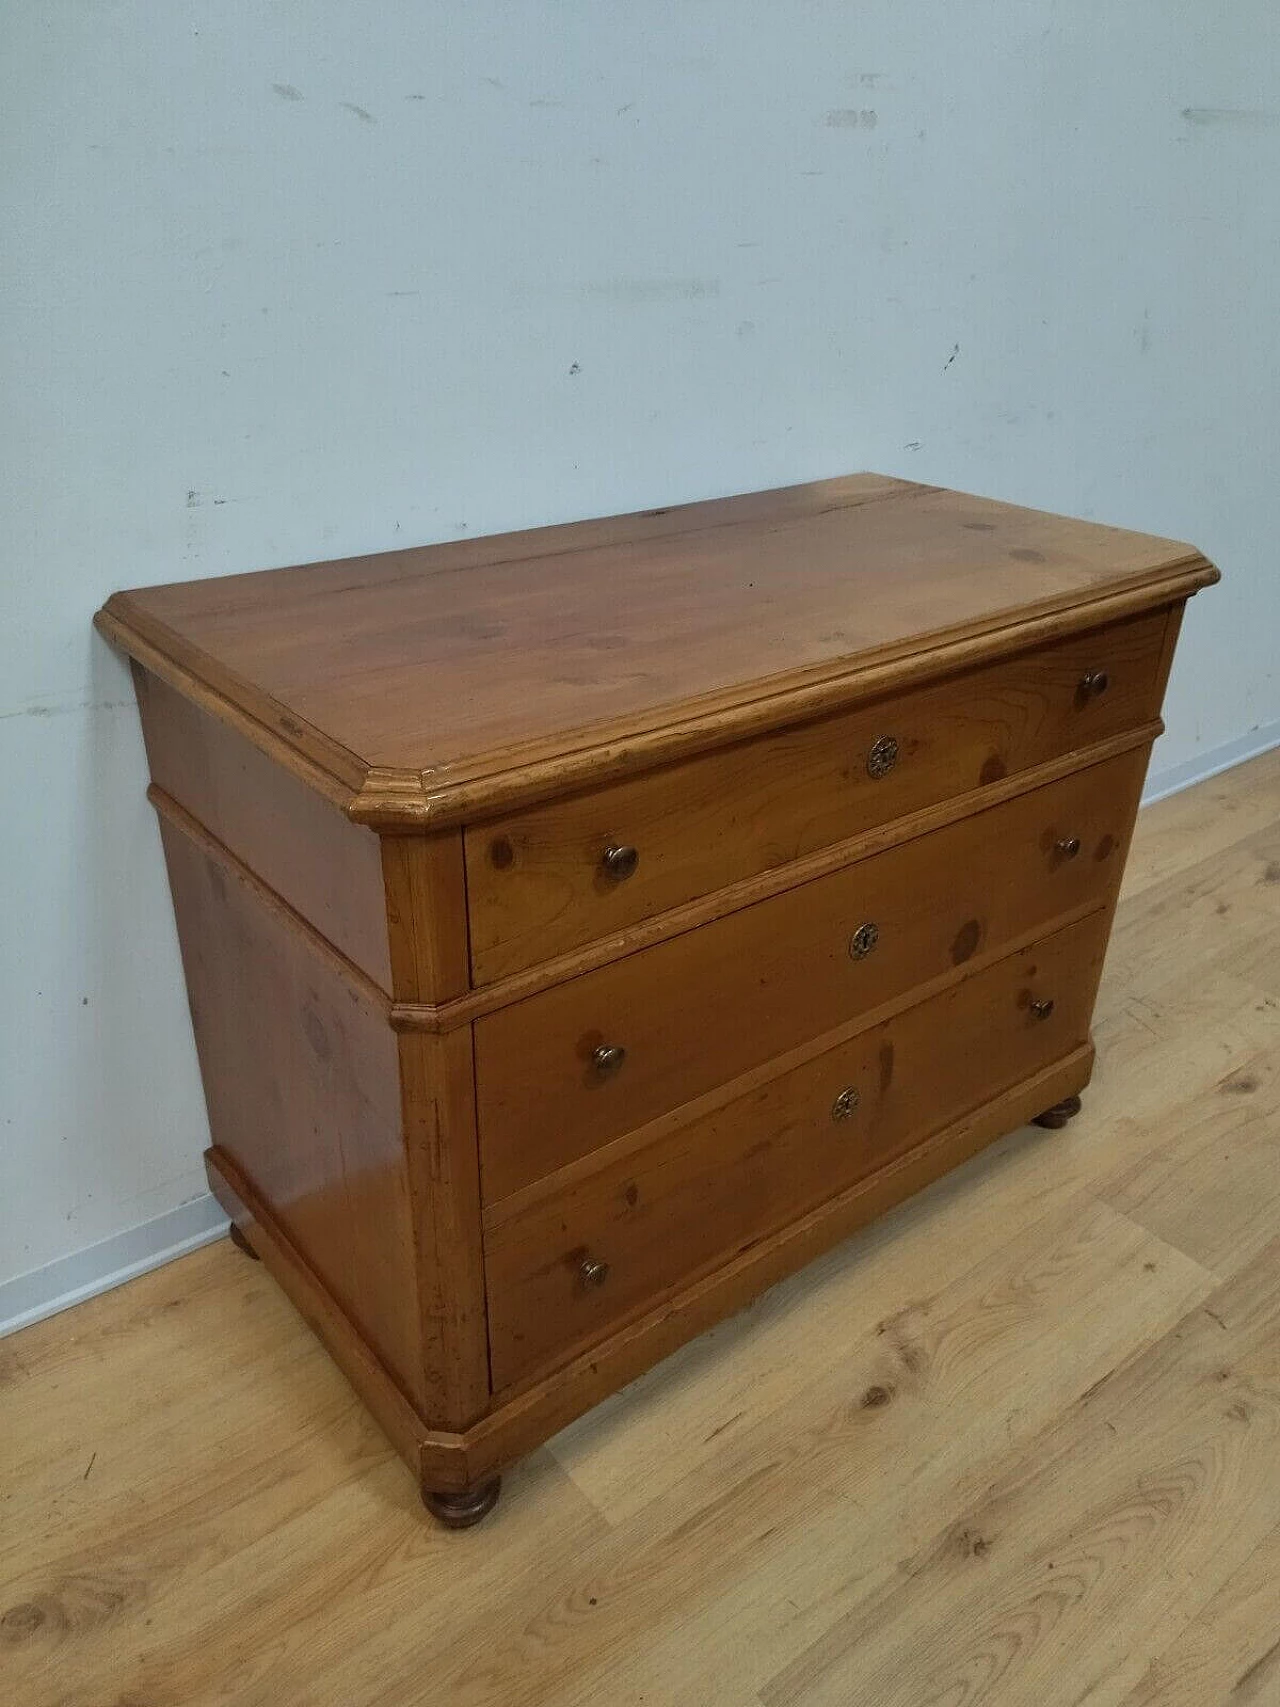 Rustic fir chest of drawers, late 19th century 14